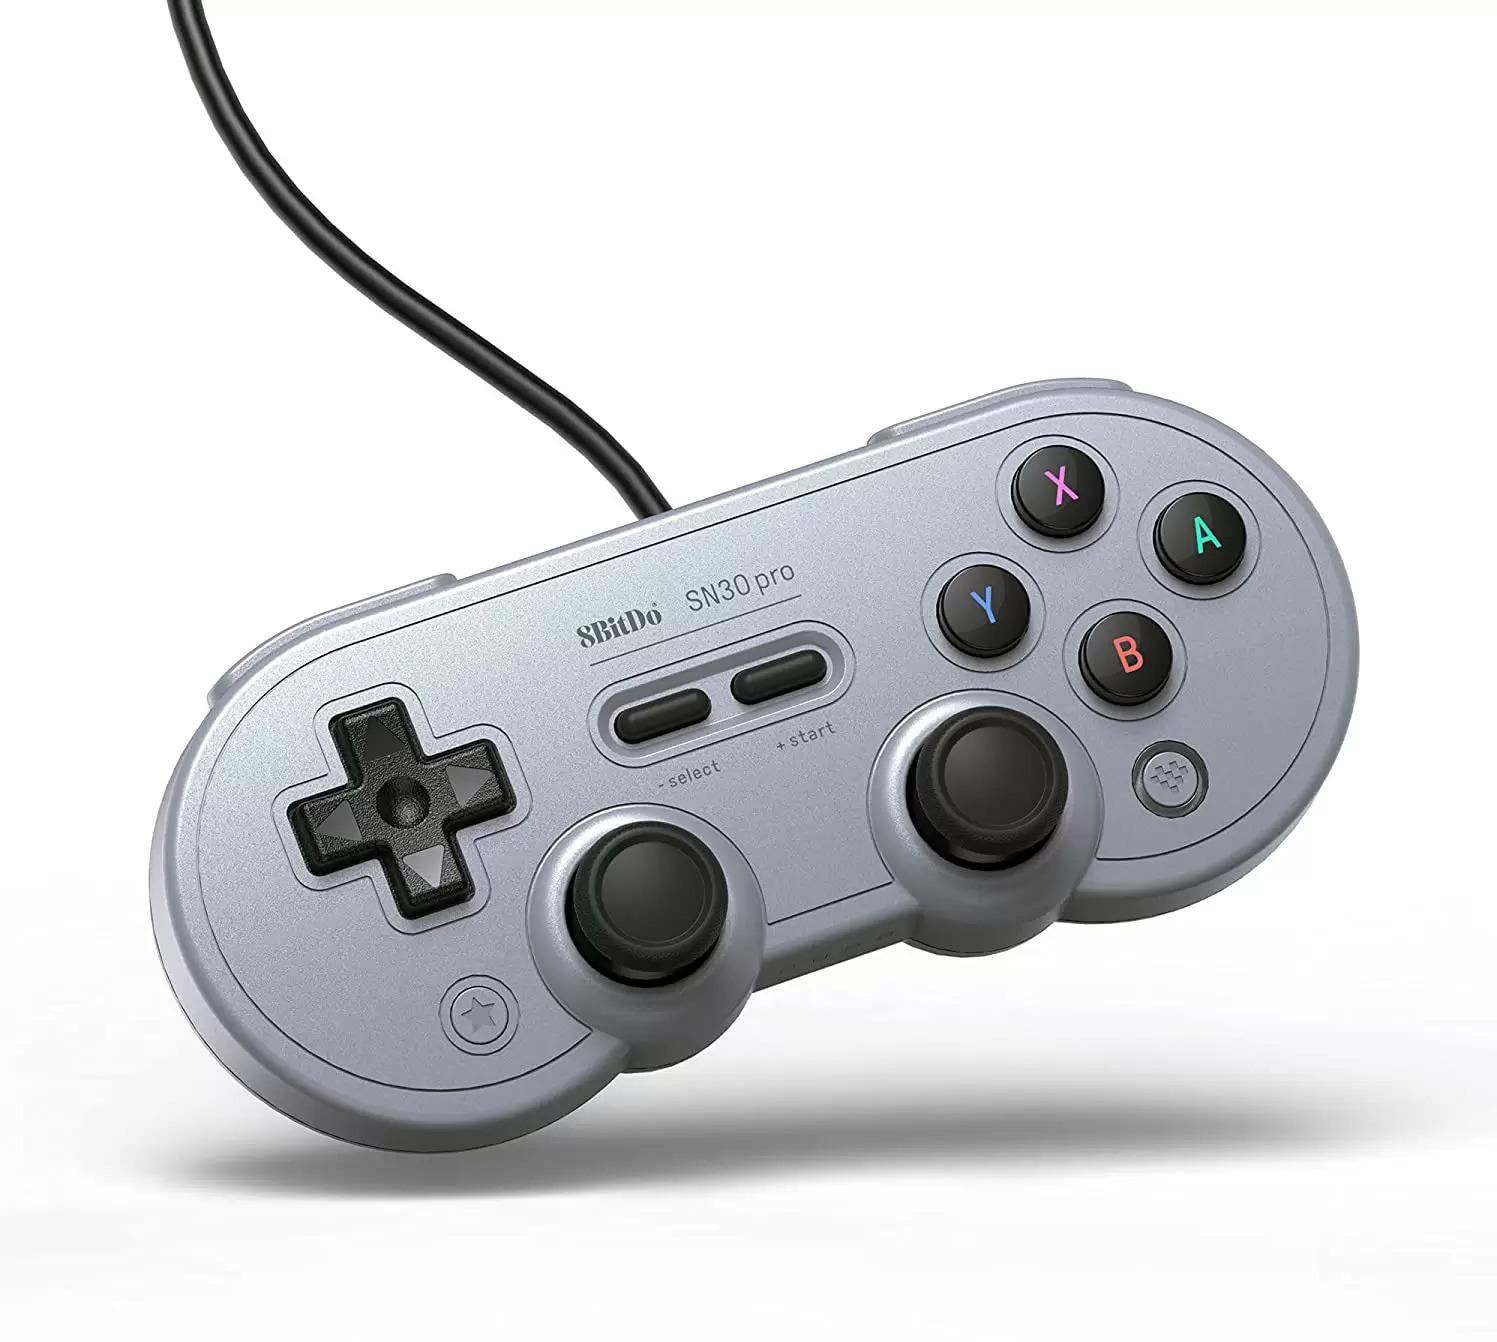 8Bitdo SN30 Pro USB Wired Gamepad for $34.99 Shipped